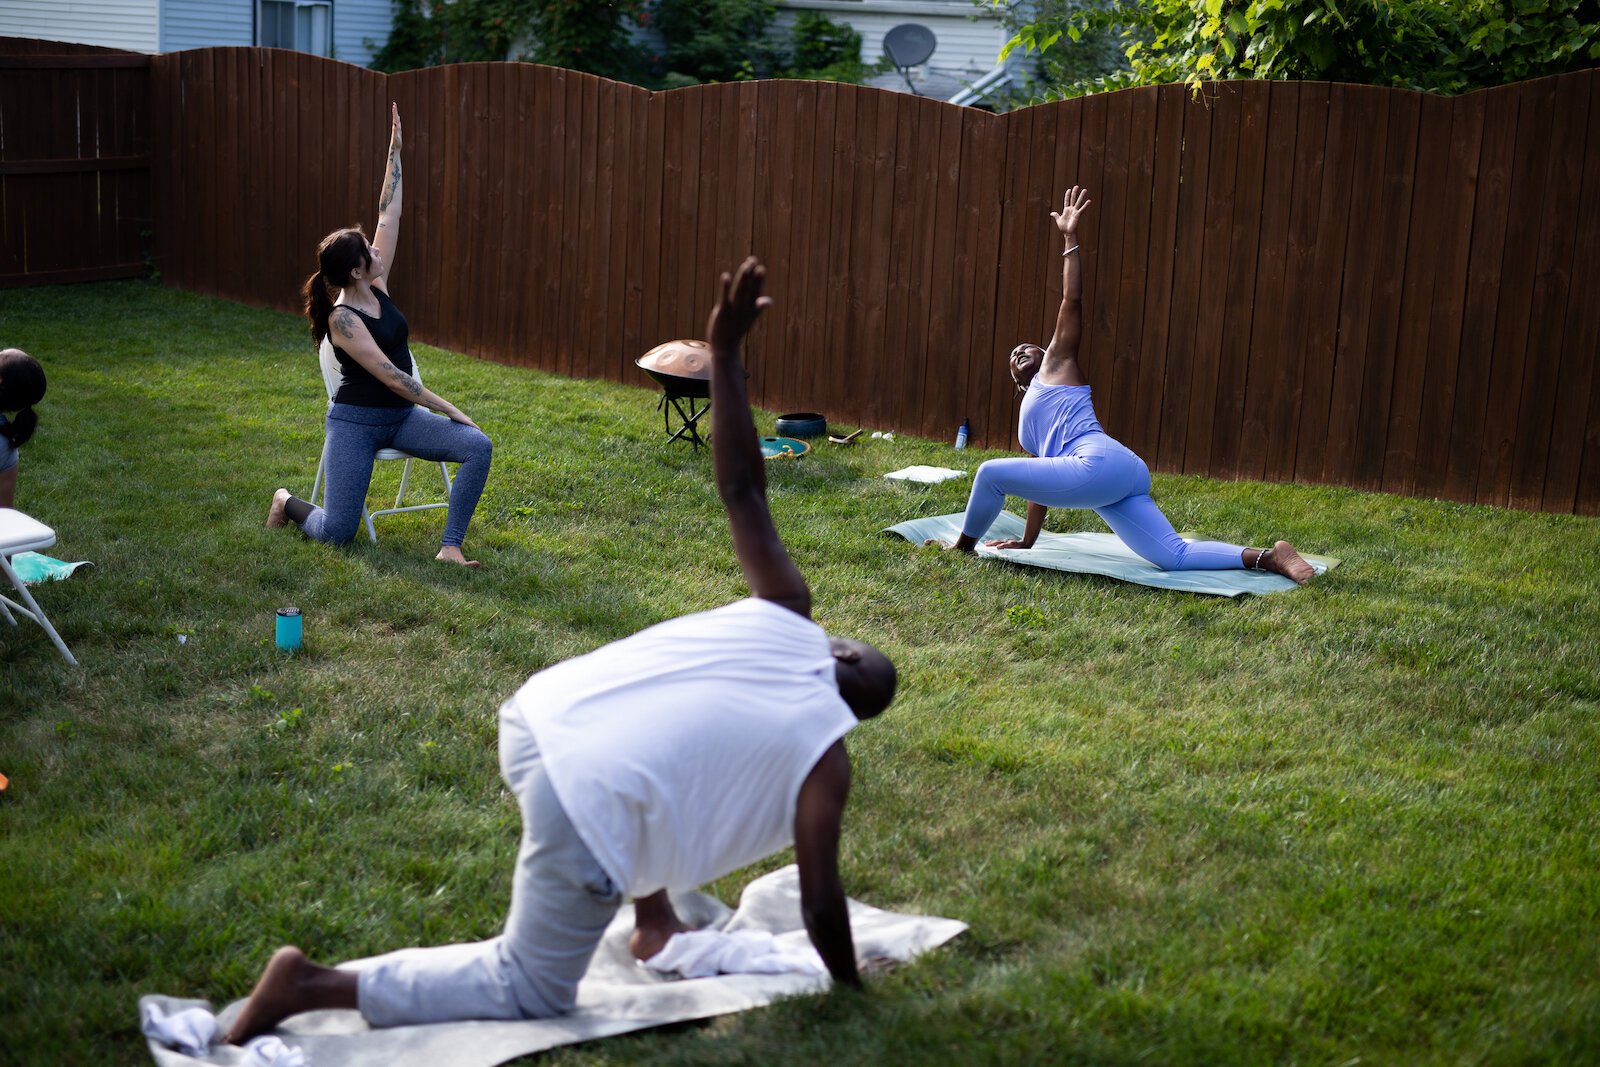 Diane Rogers, back right, a longtime resident and current President of the Oxford Community Association, leads a yoga class in her backyard for her neighborhood and community drop-ins.